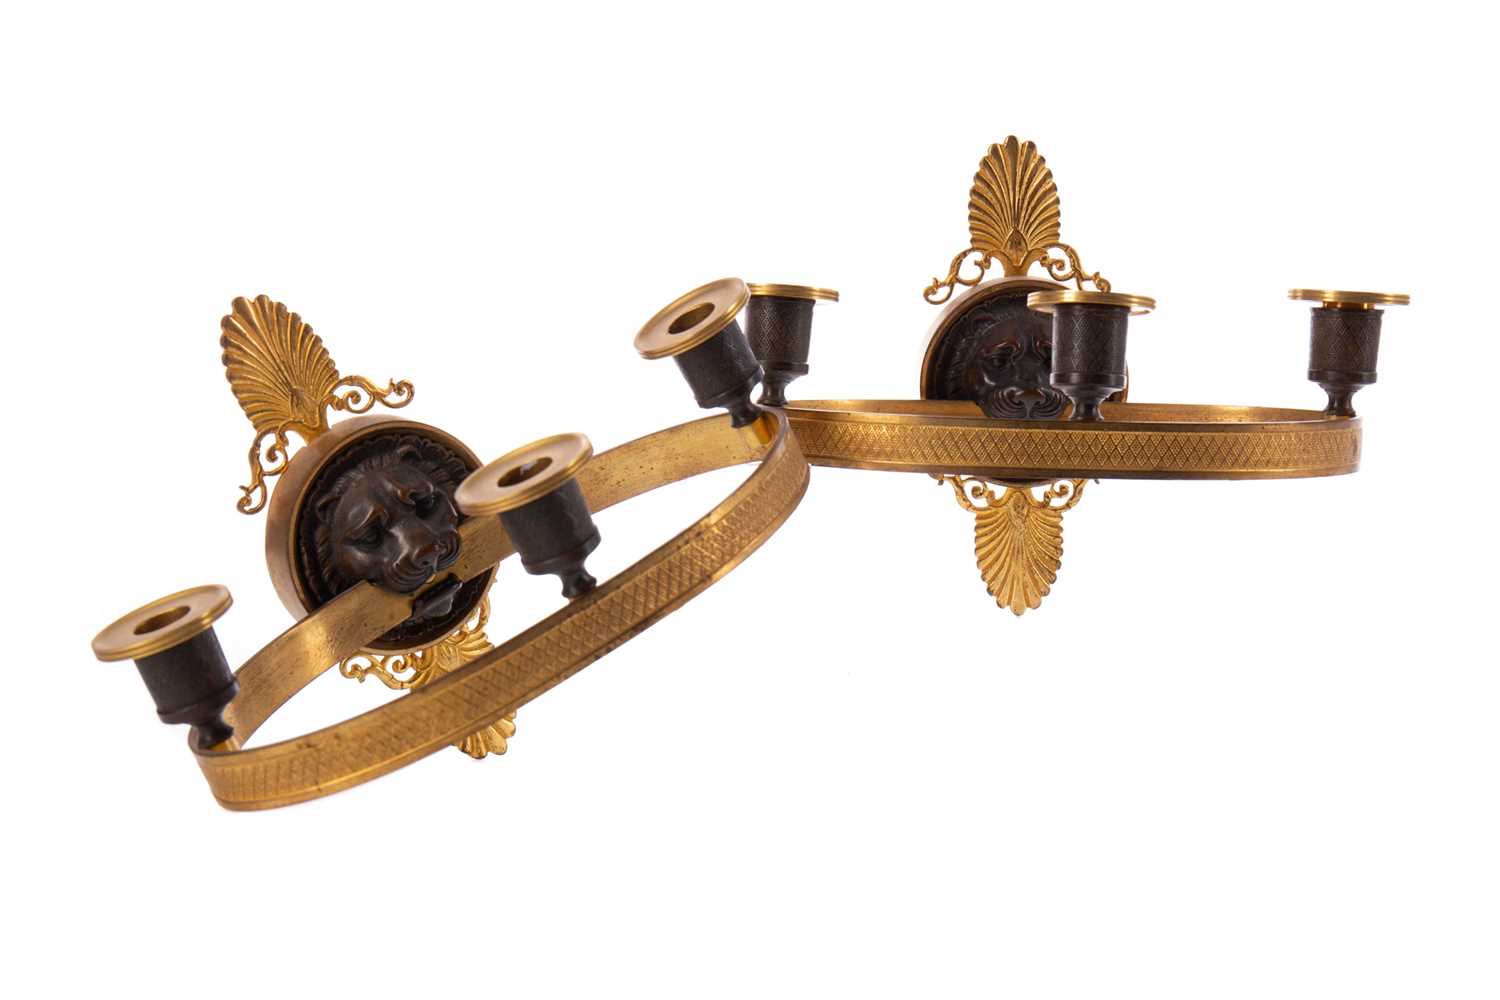 Lot 1311 - A PAIR OF 19TH CENTURY FRENCH EMPIRE BRONZE AND ORMOLU WALL SCONCES